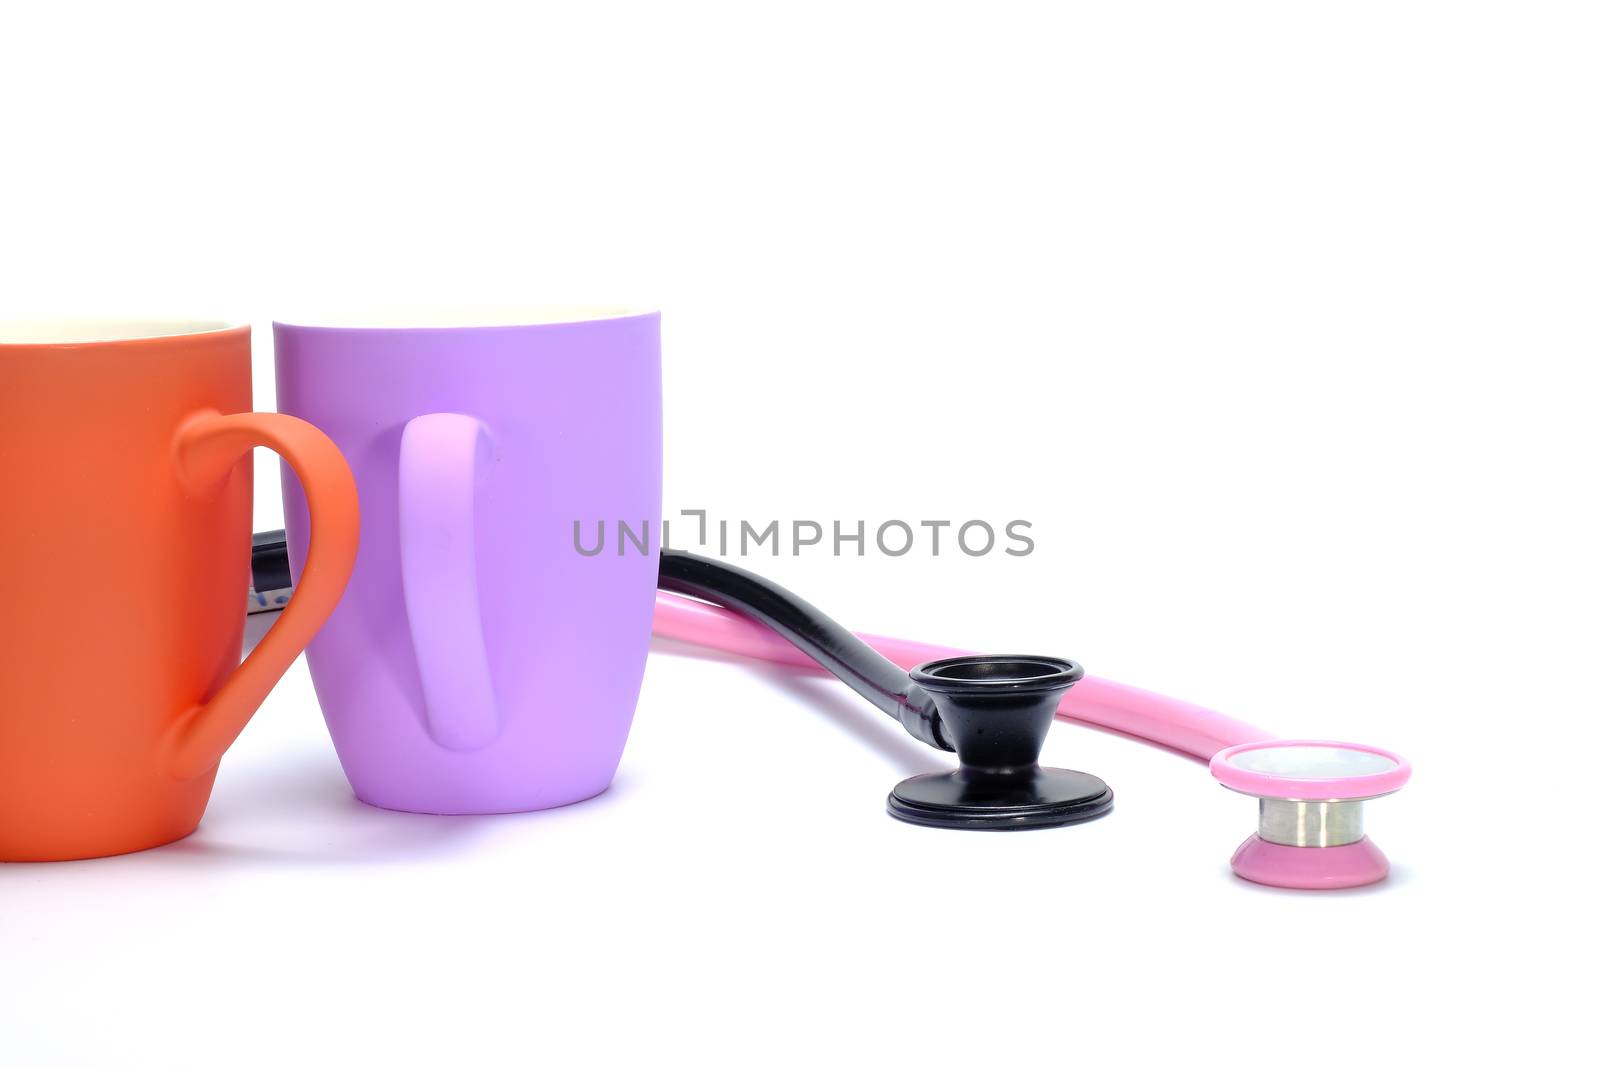 coffe mugs and stethoscopes by Nawoot